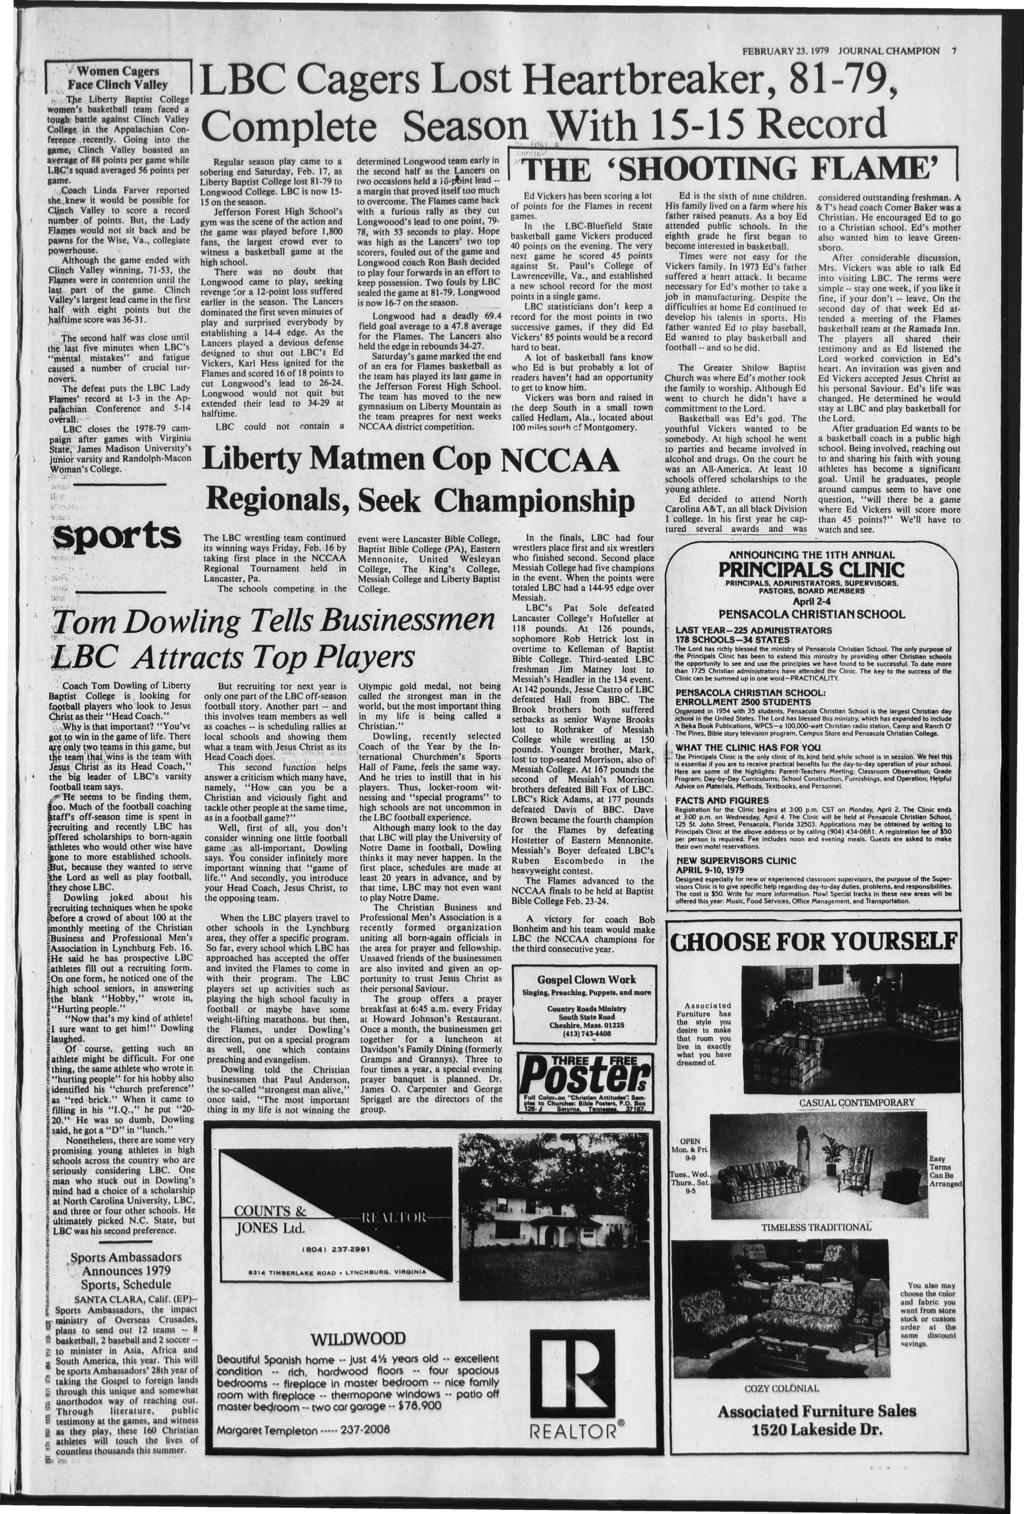 FEBRUARY 23. 1979 JOURNAL CHAMPON Women Cagers Face Clnch Valley The Lberty Baptst College womens basketball team faced a tough battle aganst Clnch Valley College n the Appalachan Conference recently.